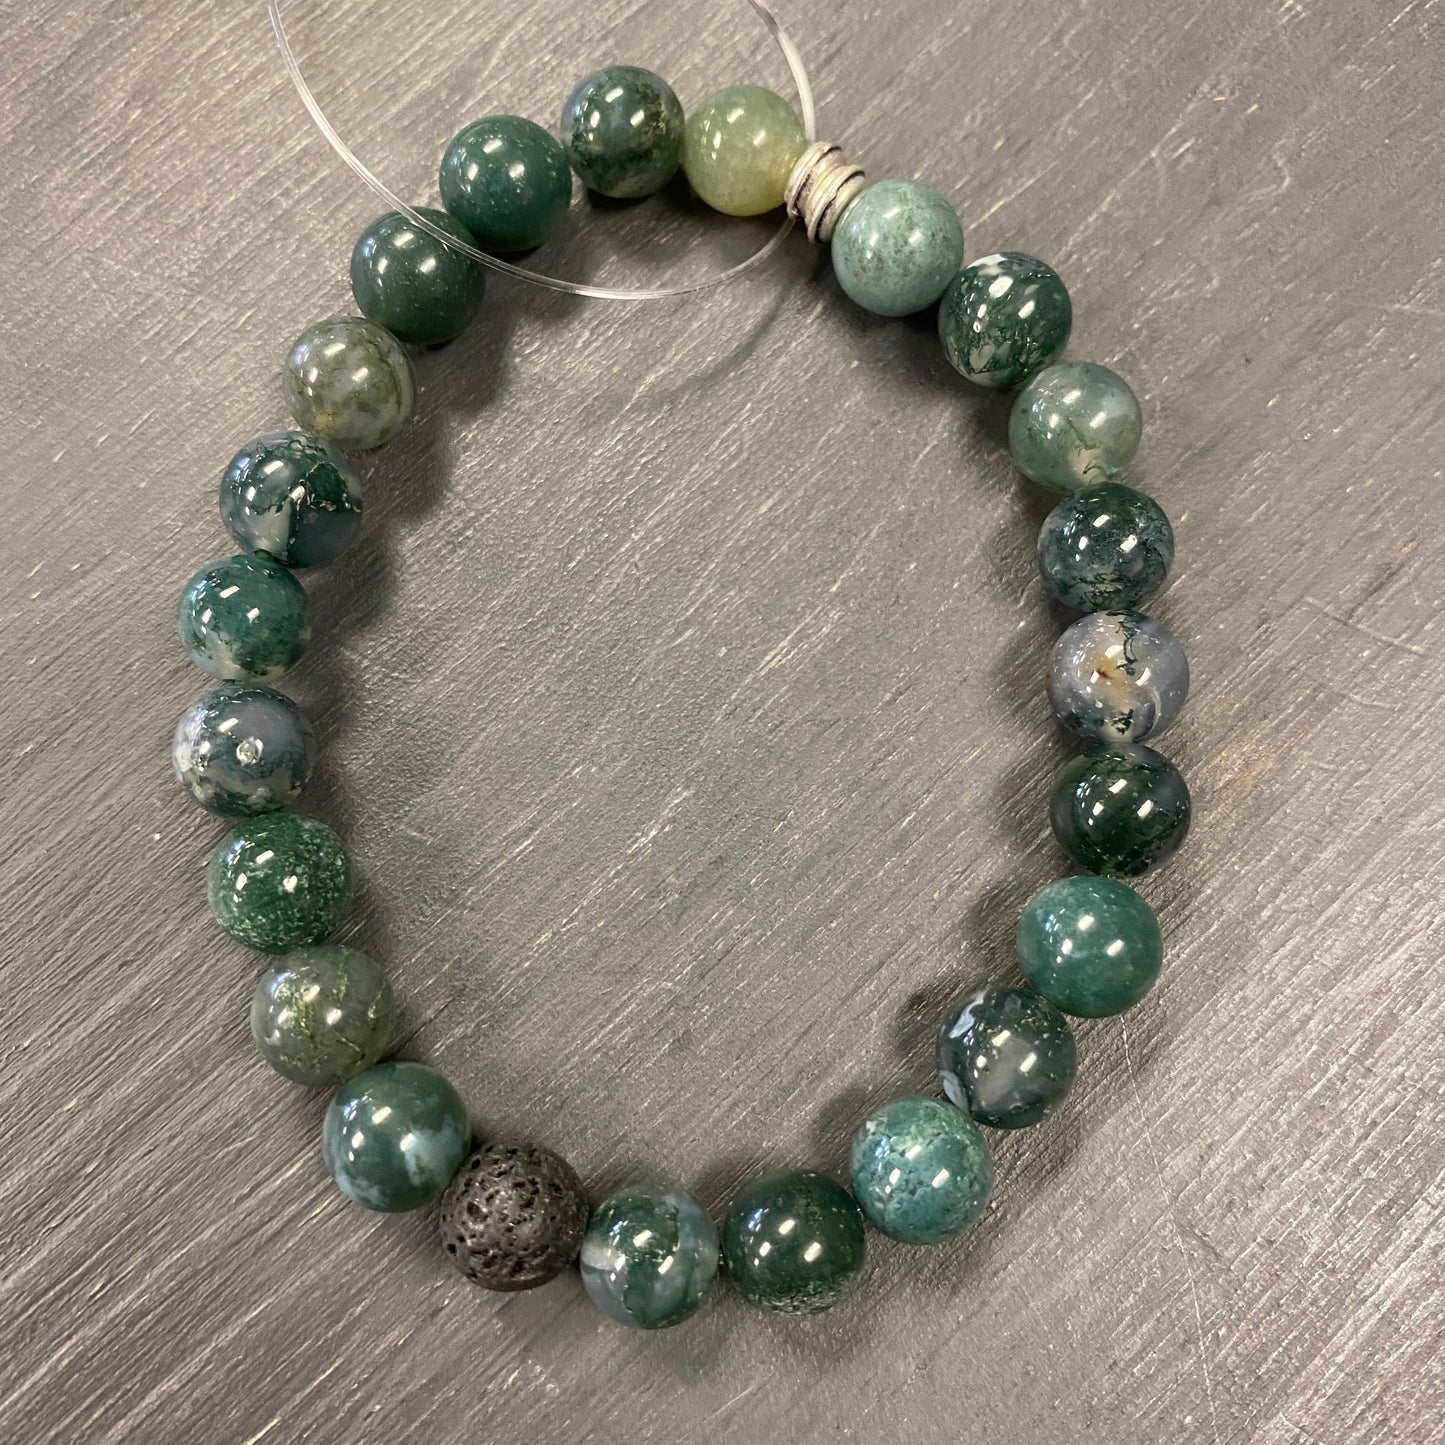 Bracelet - Moss Agate with Lava